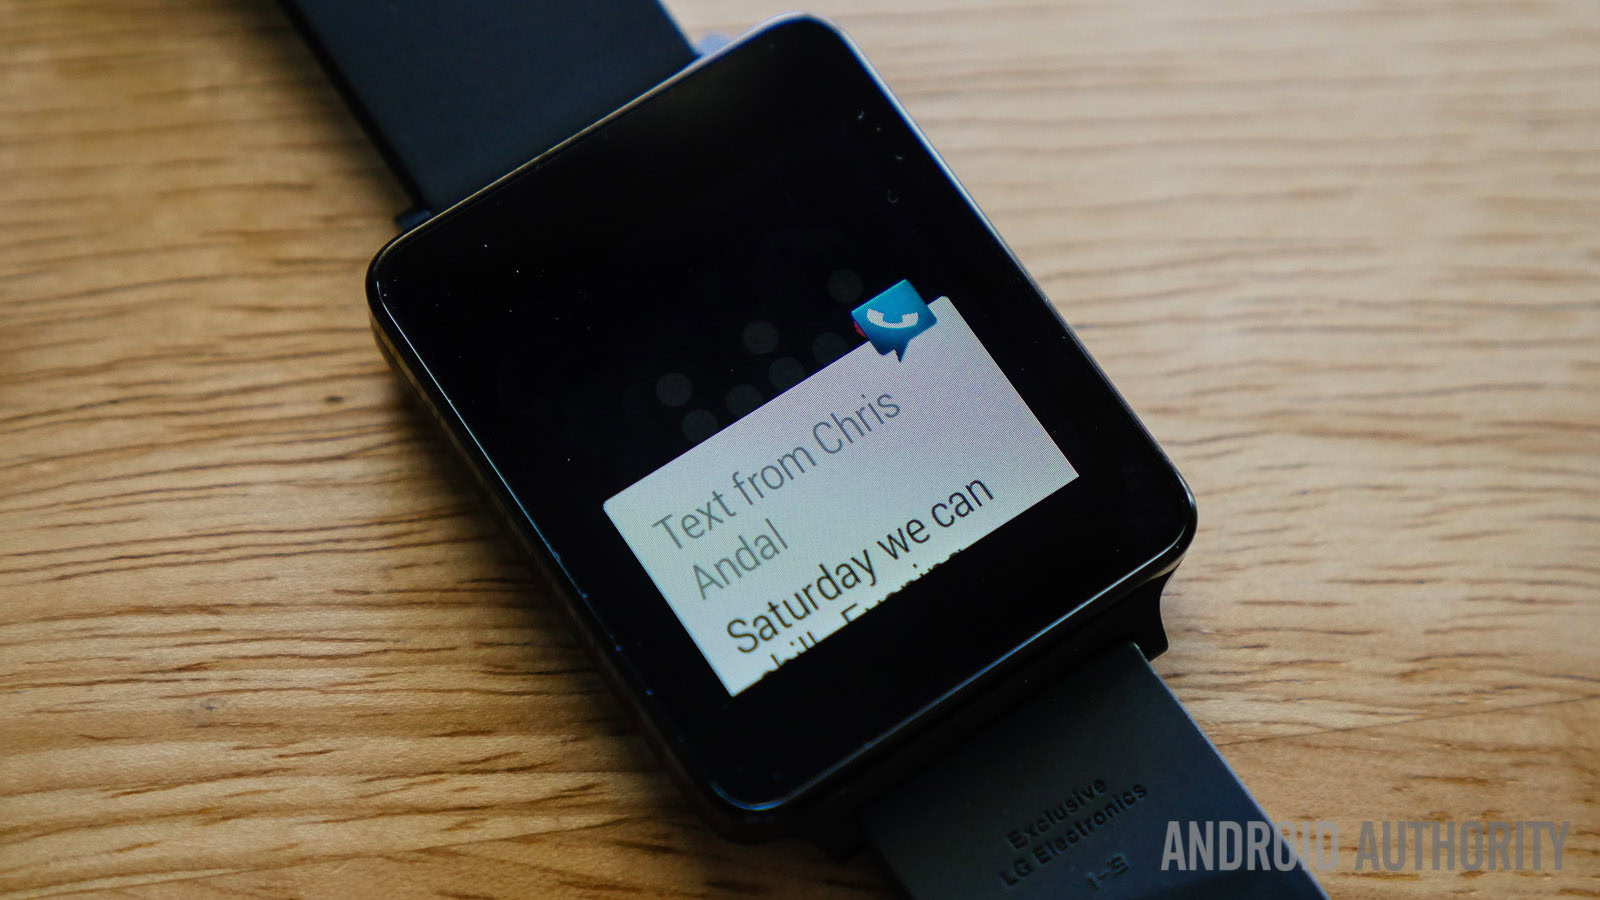 Android wear smartwatch